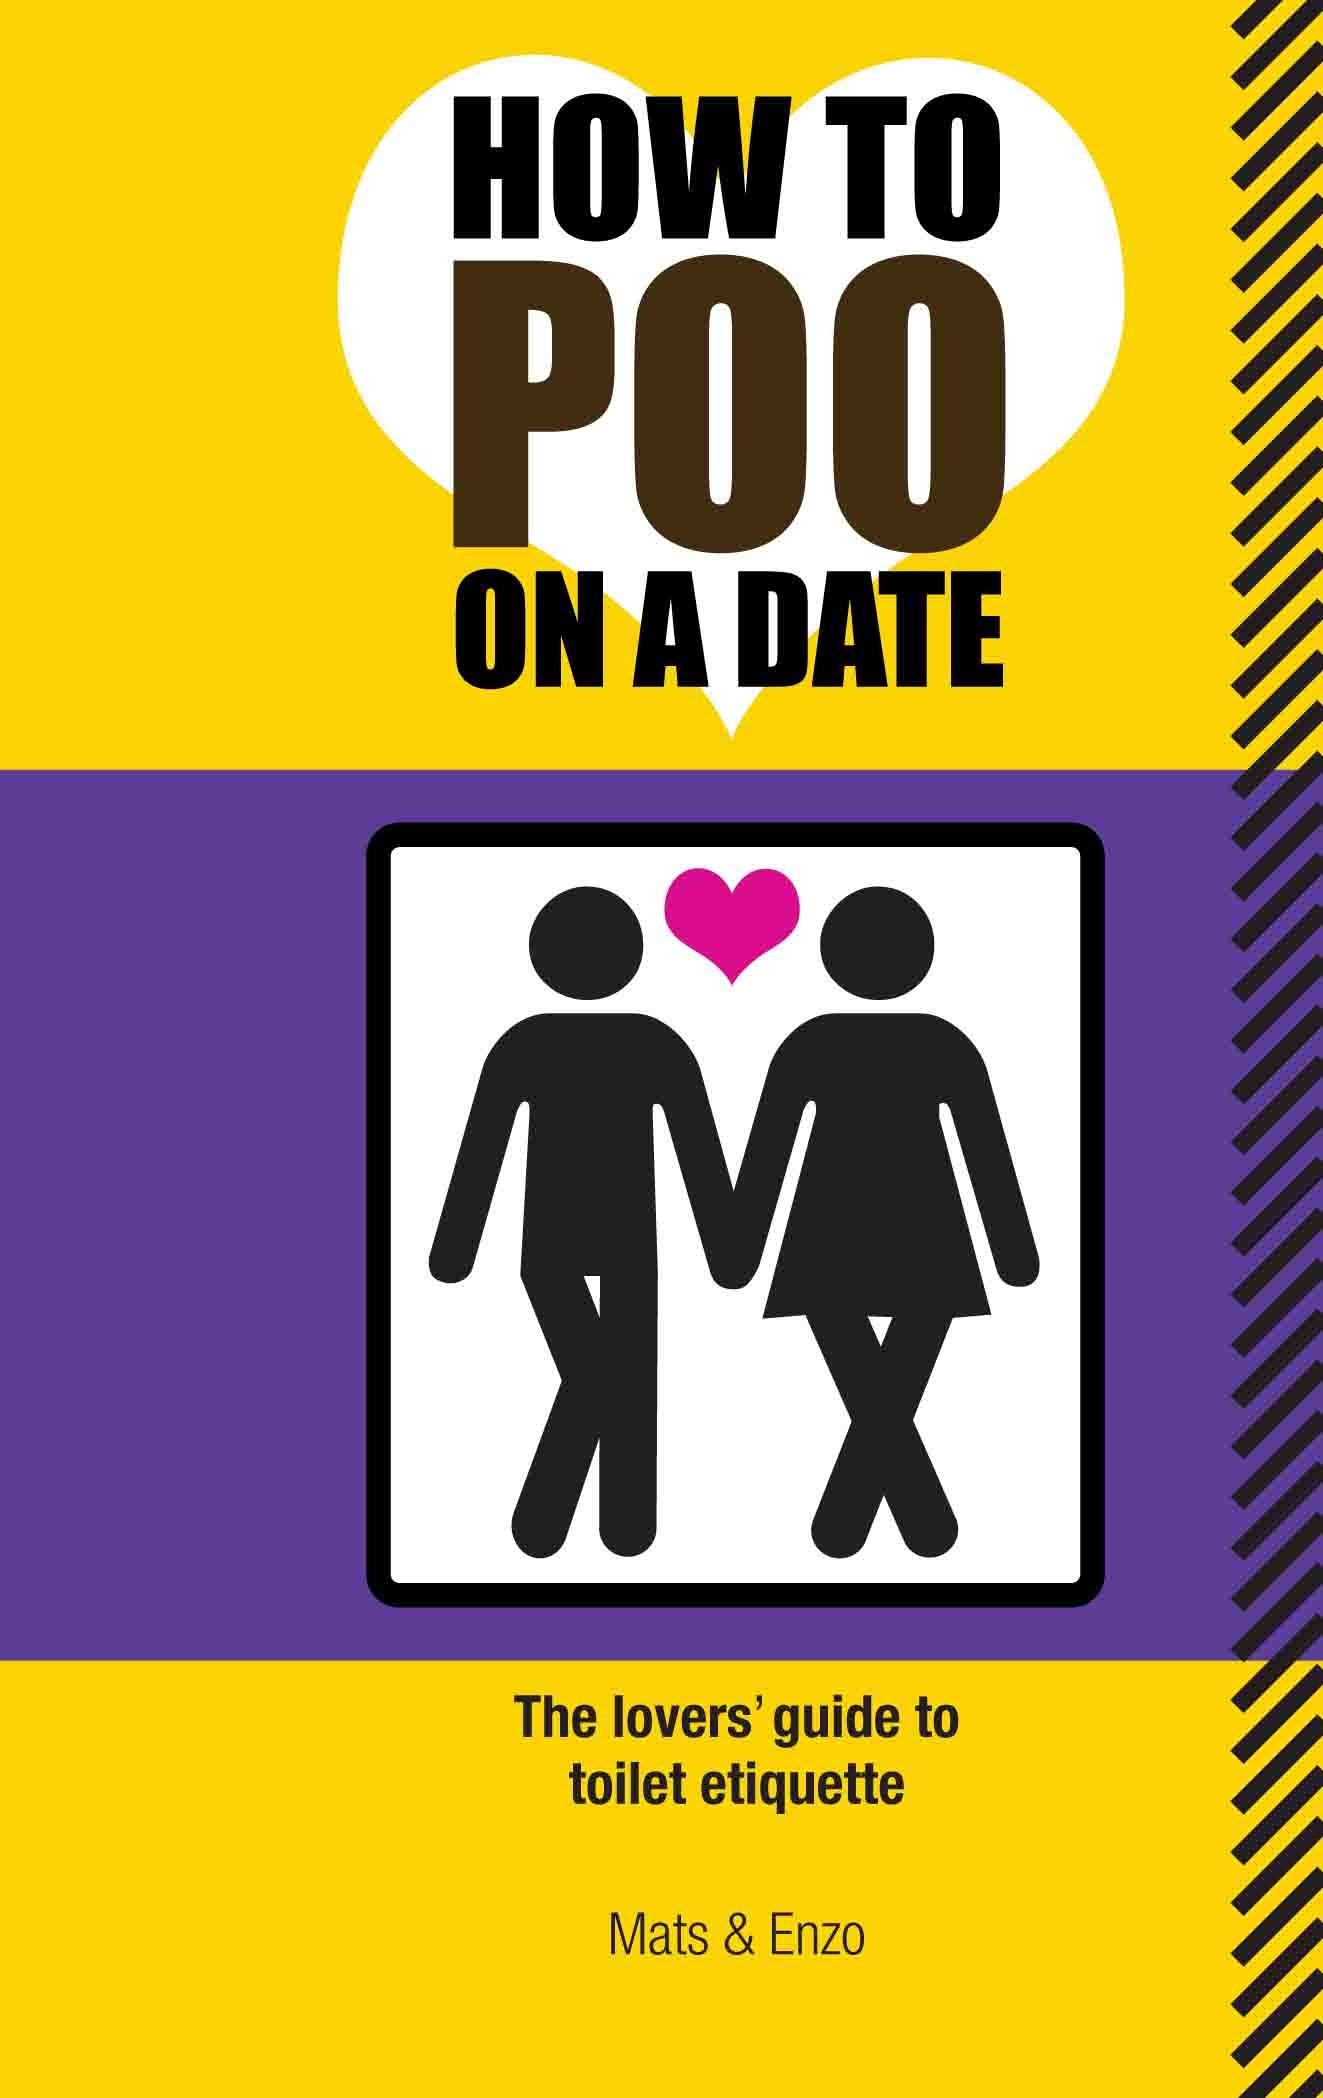 'How to Poo on a Date' by Mats & Enzo